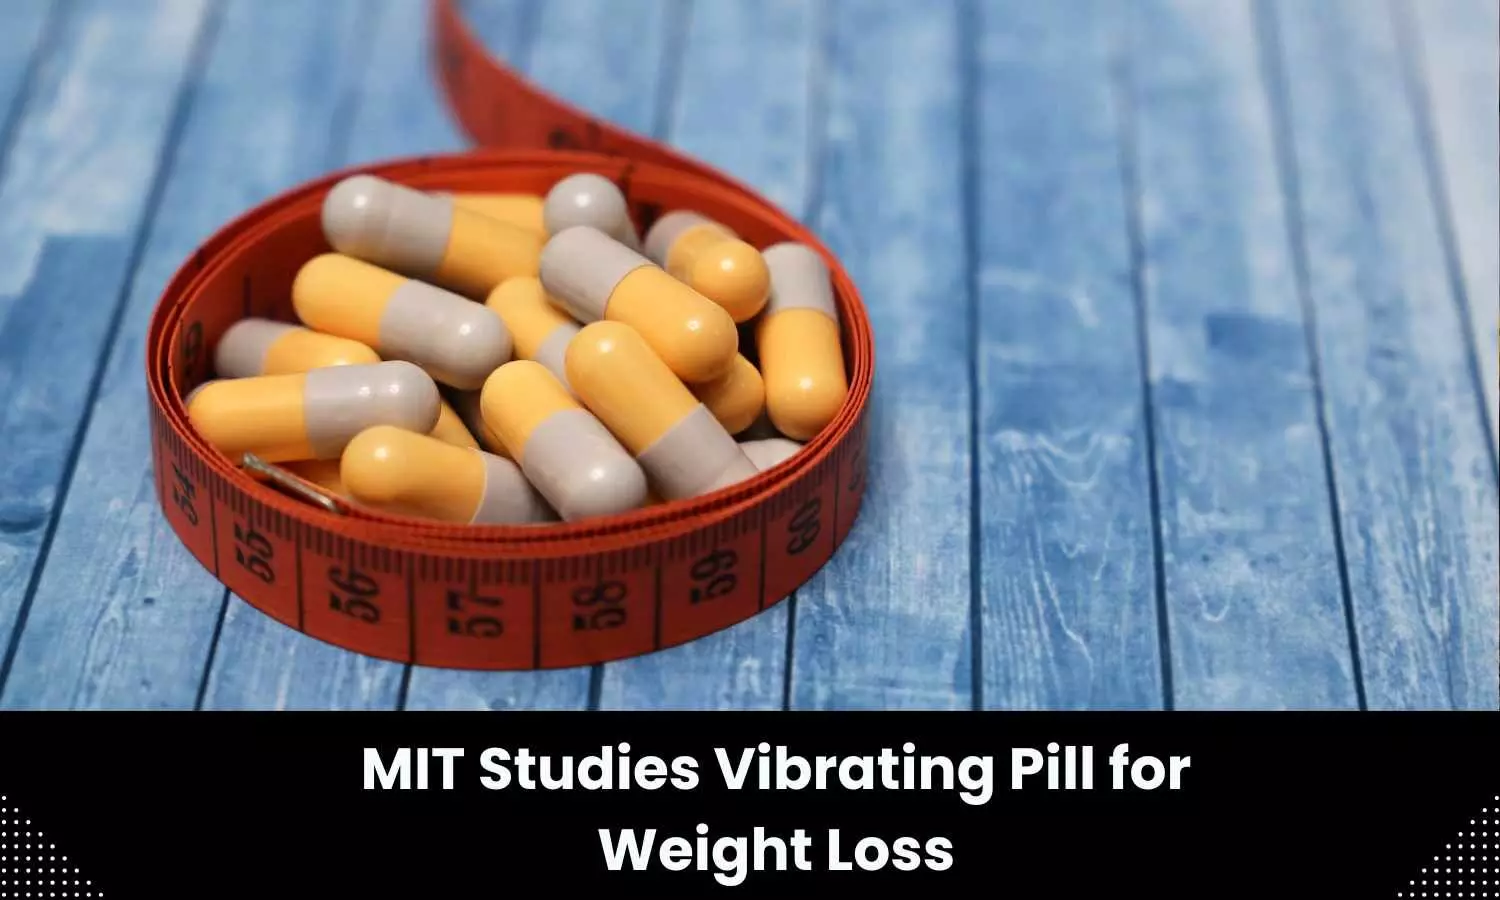 MIT studies vibrating pill for weight loss